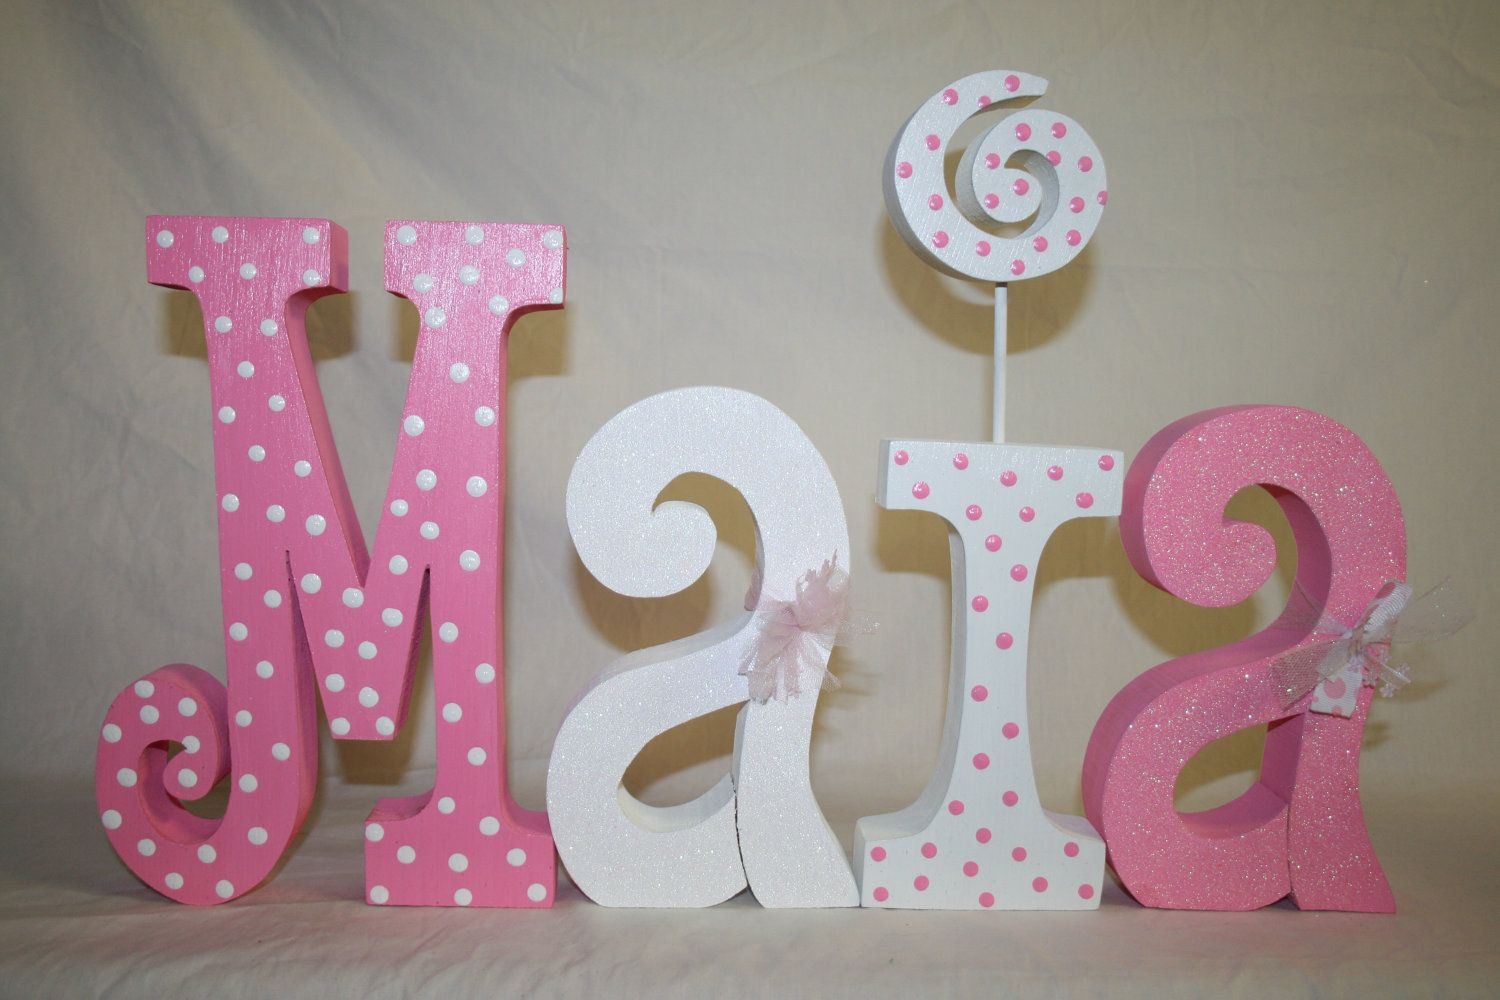 Baby Name Letters Room Decor
 Nursery letters Wood letters Personalized wood letters